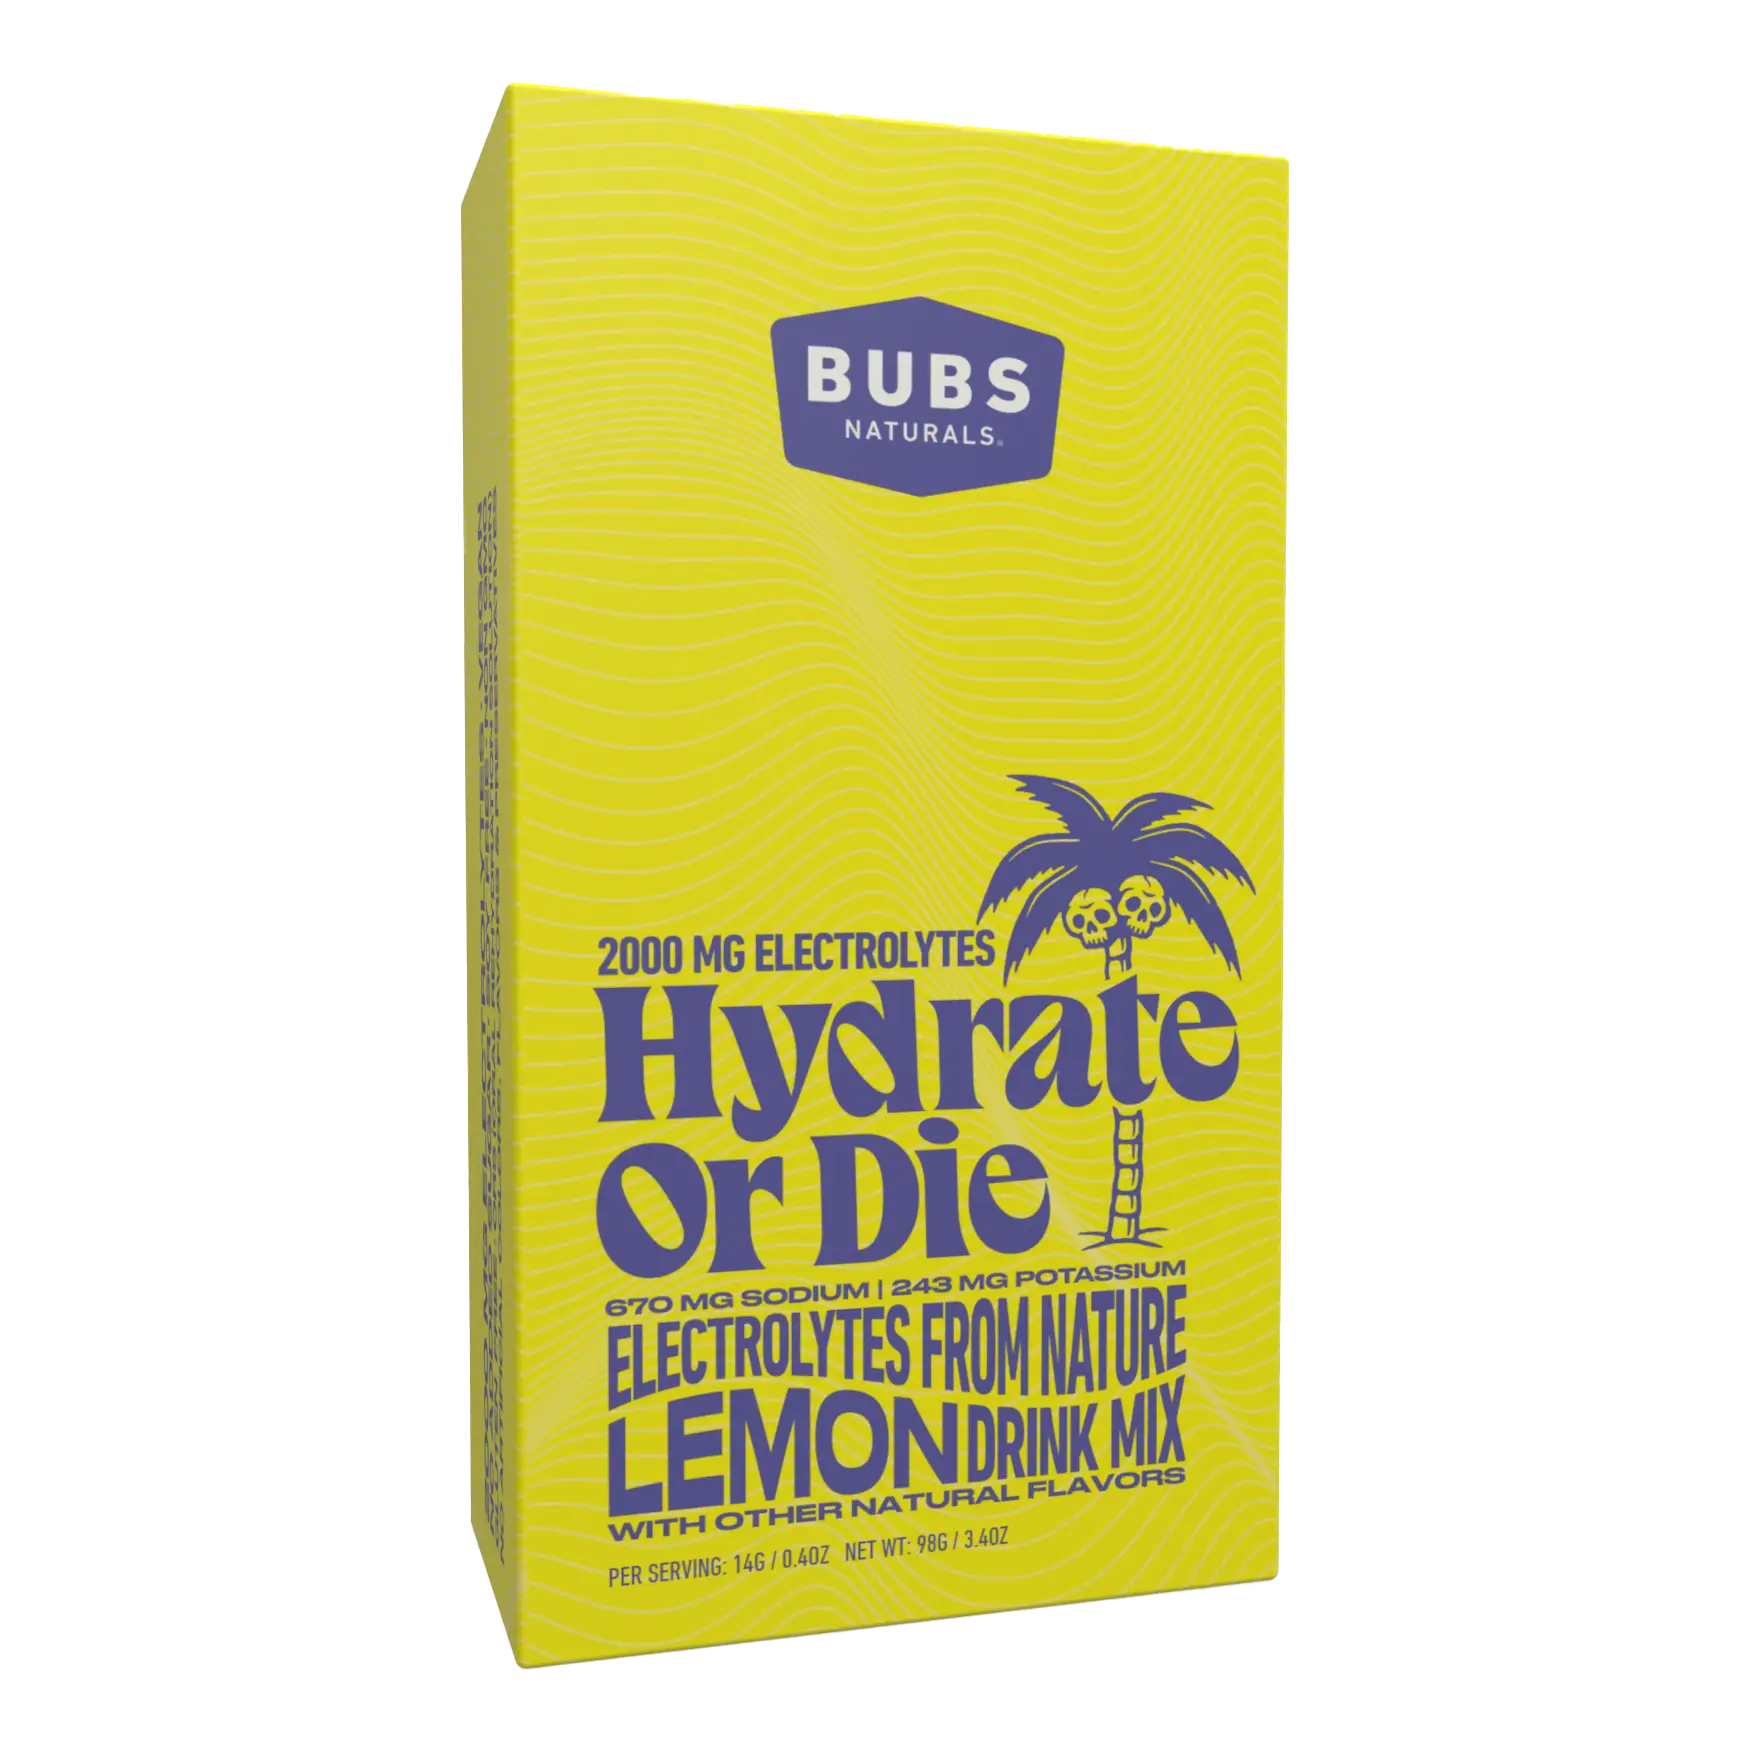 BUBS Naturals Hydrate or Die Electrolyte Cartons, Lemon Front